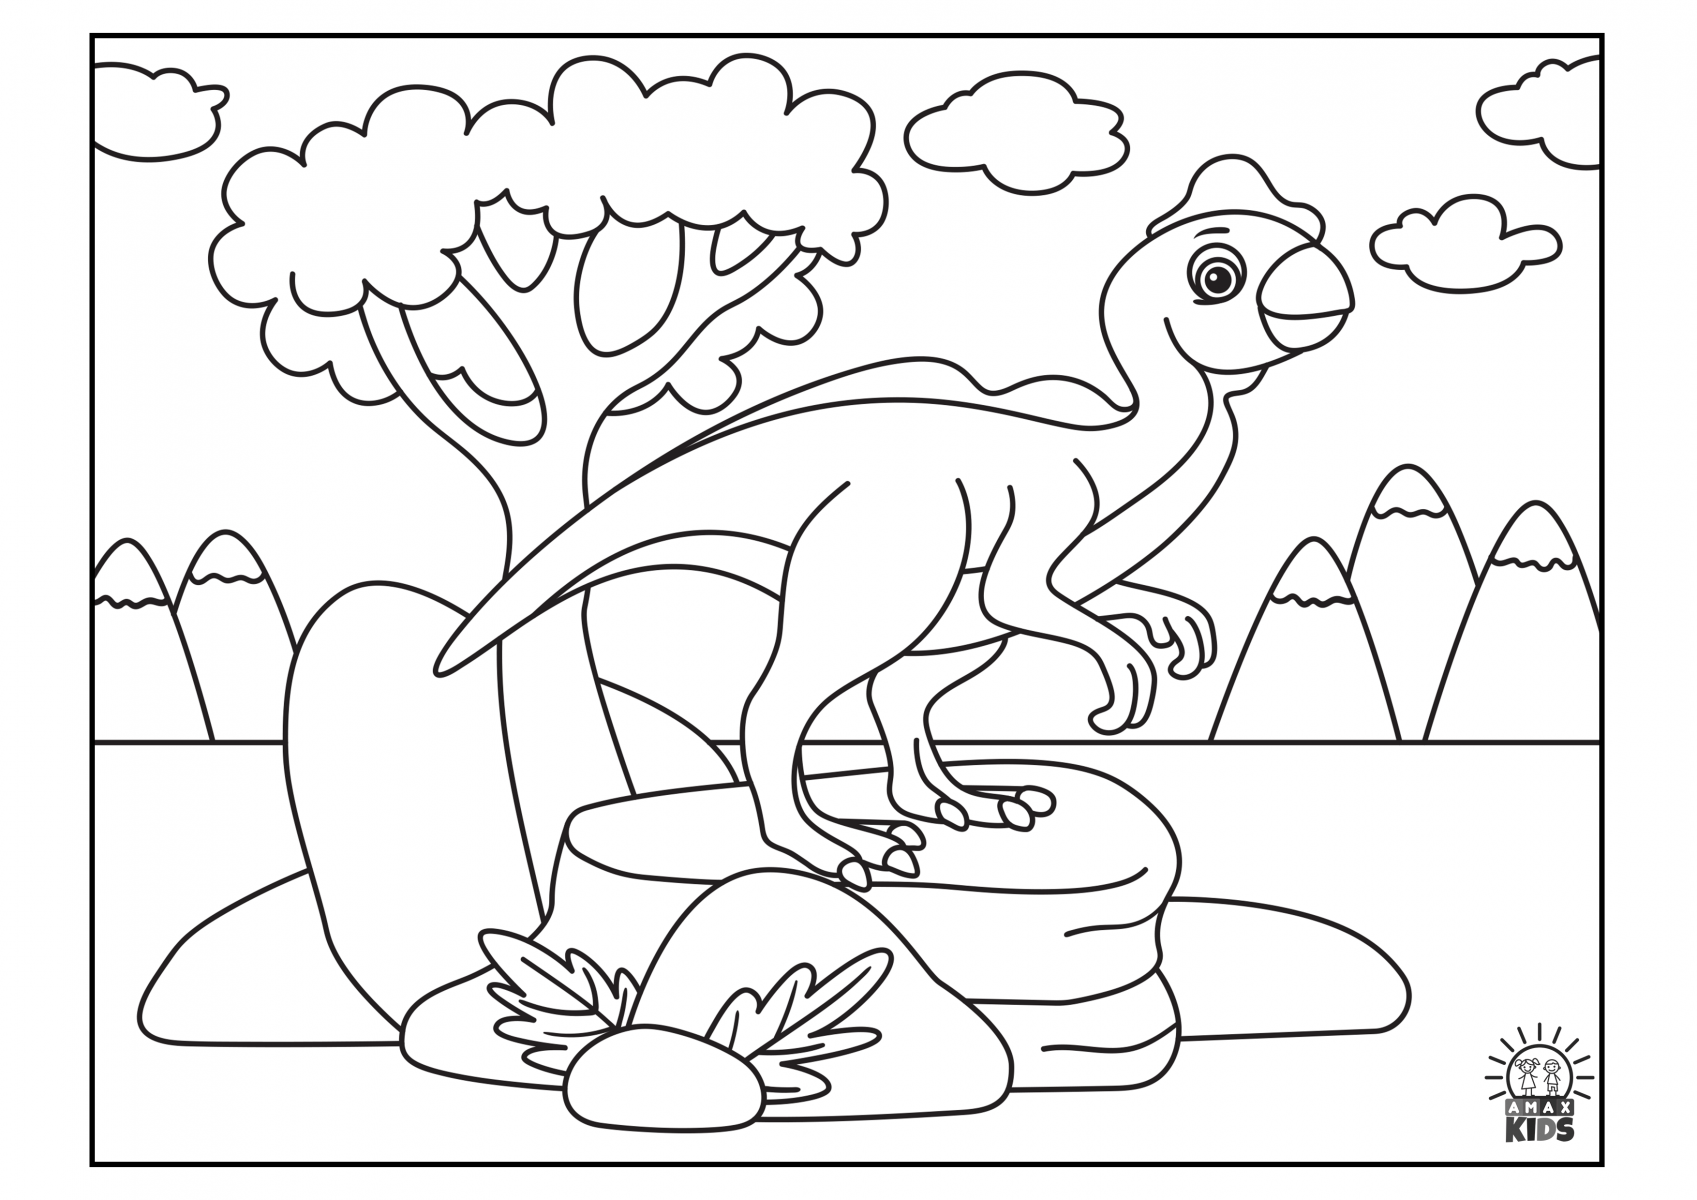 Download Dinosaur coloring pages for kids | Amax Kids